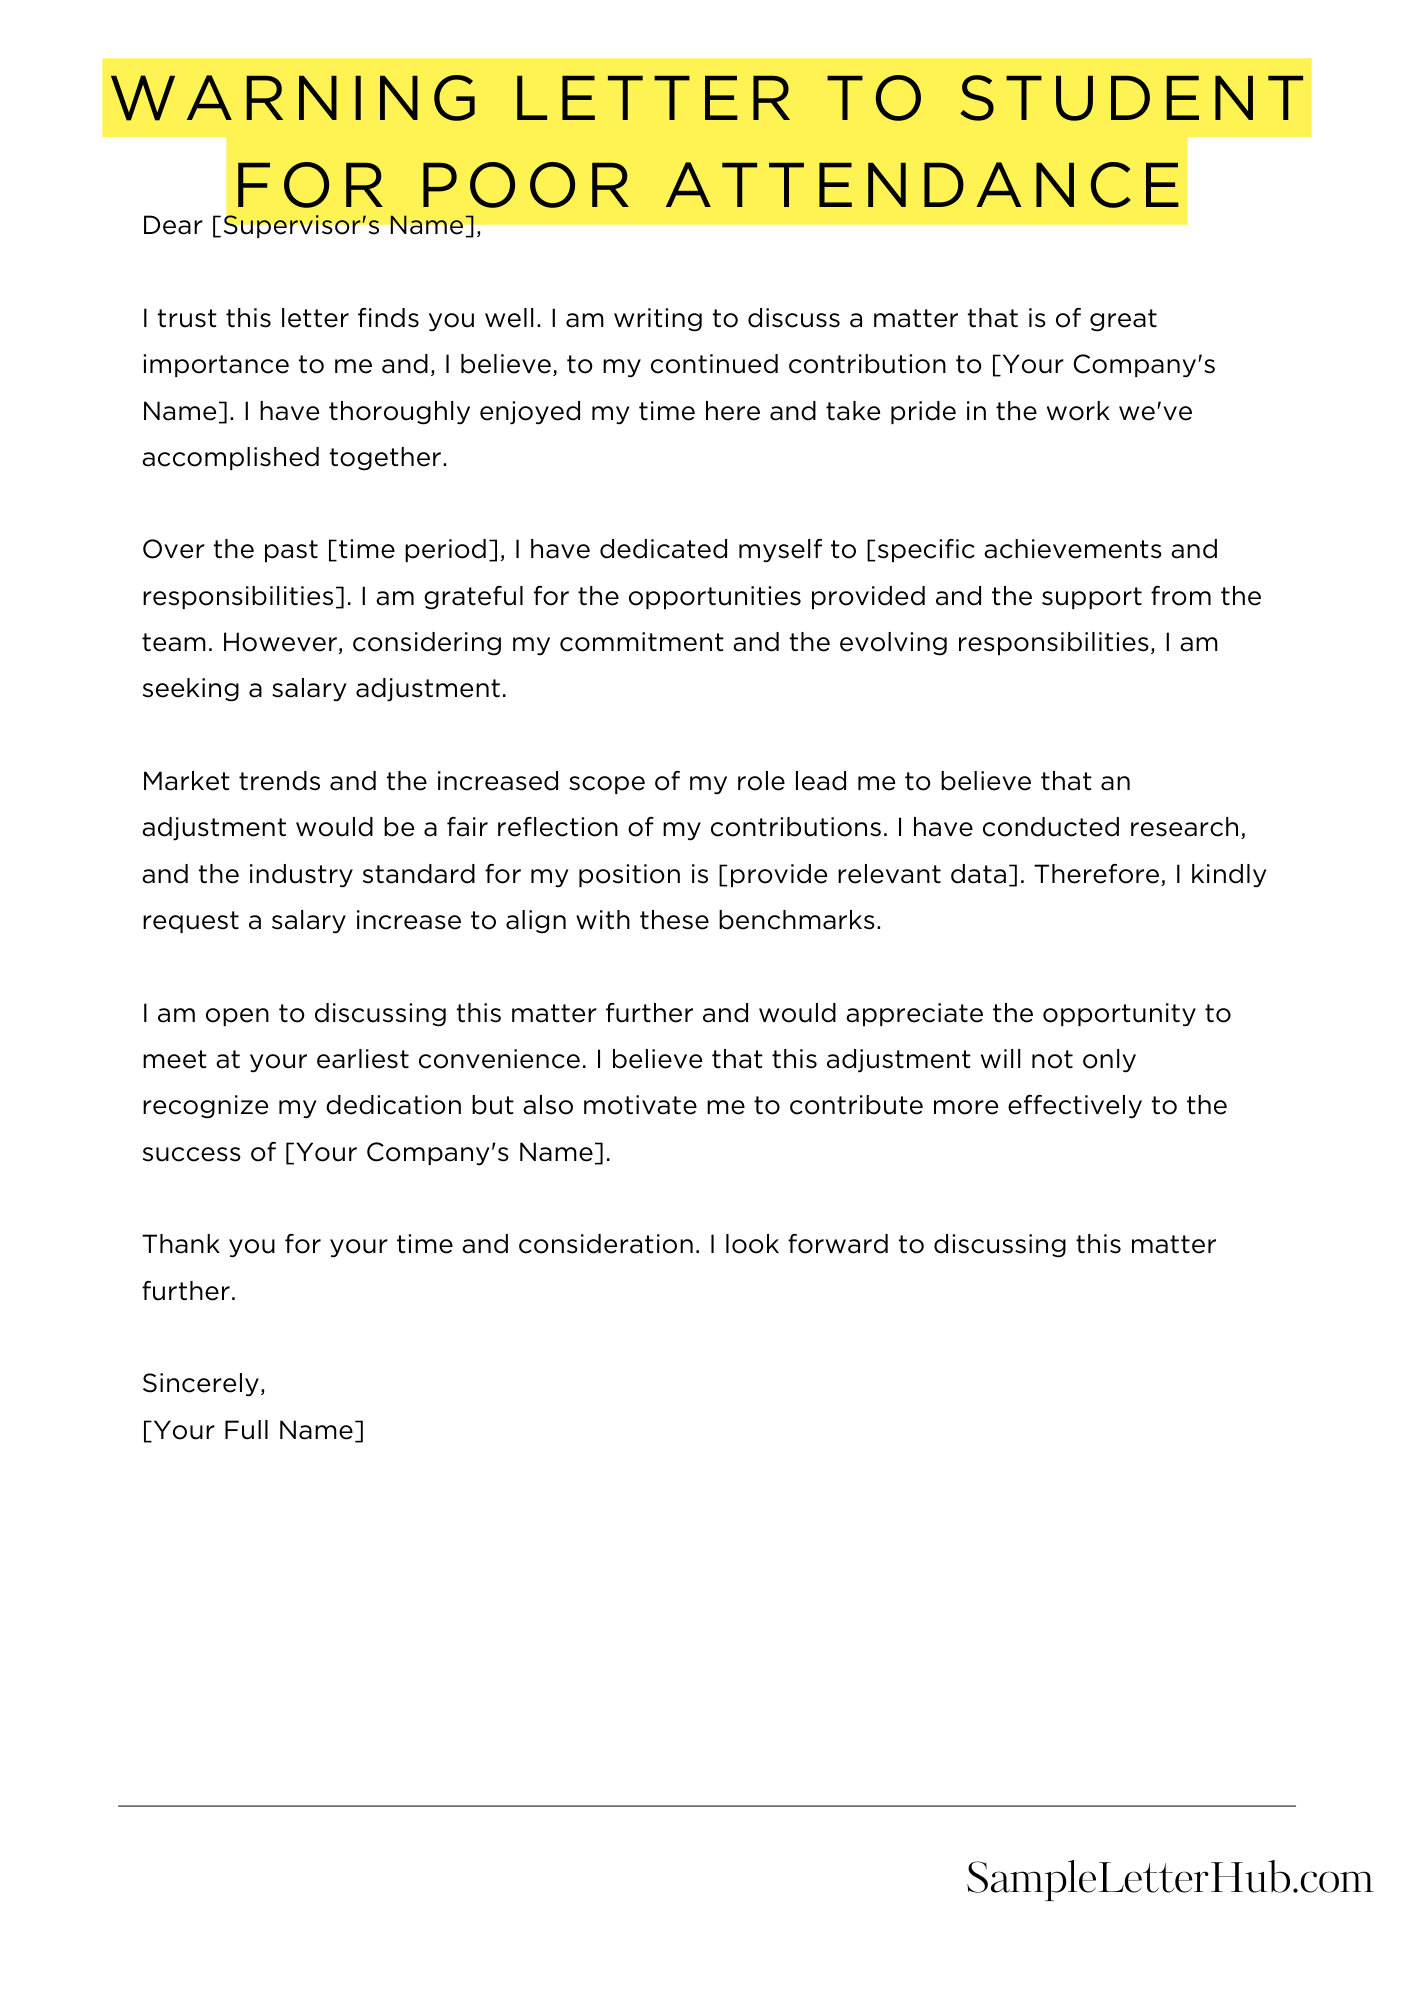 Warning Letter To Student For Poor Attendance